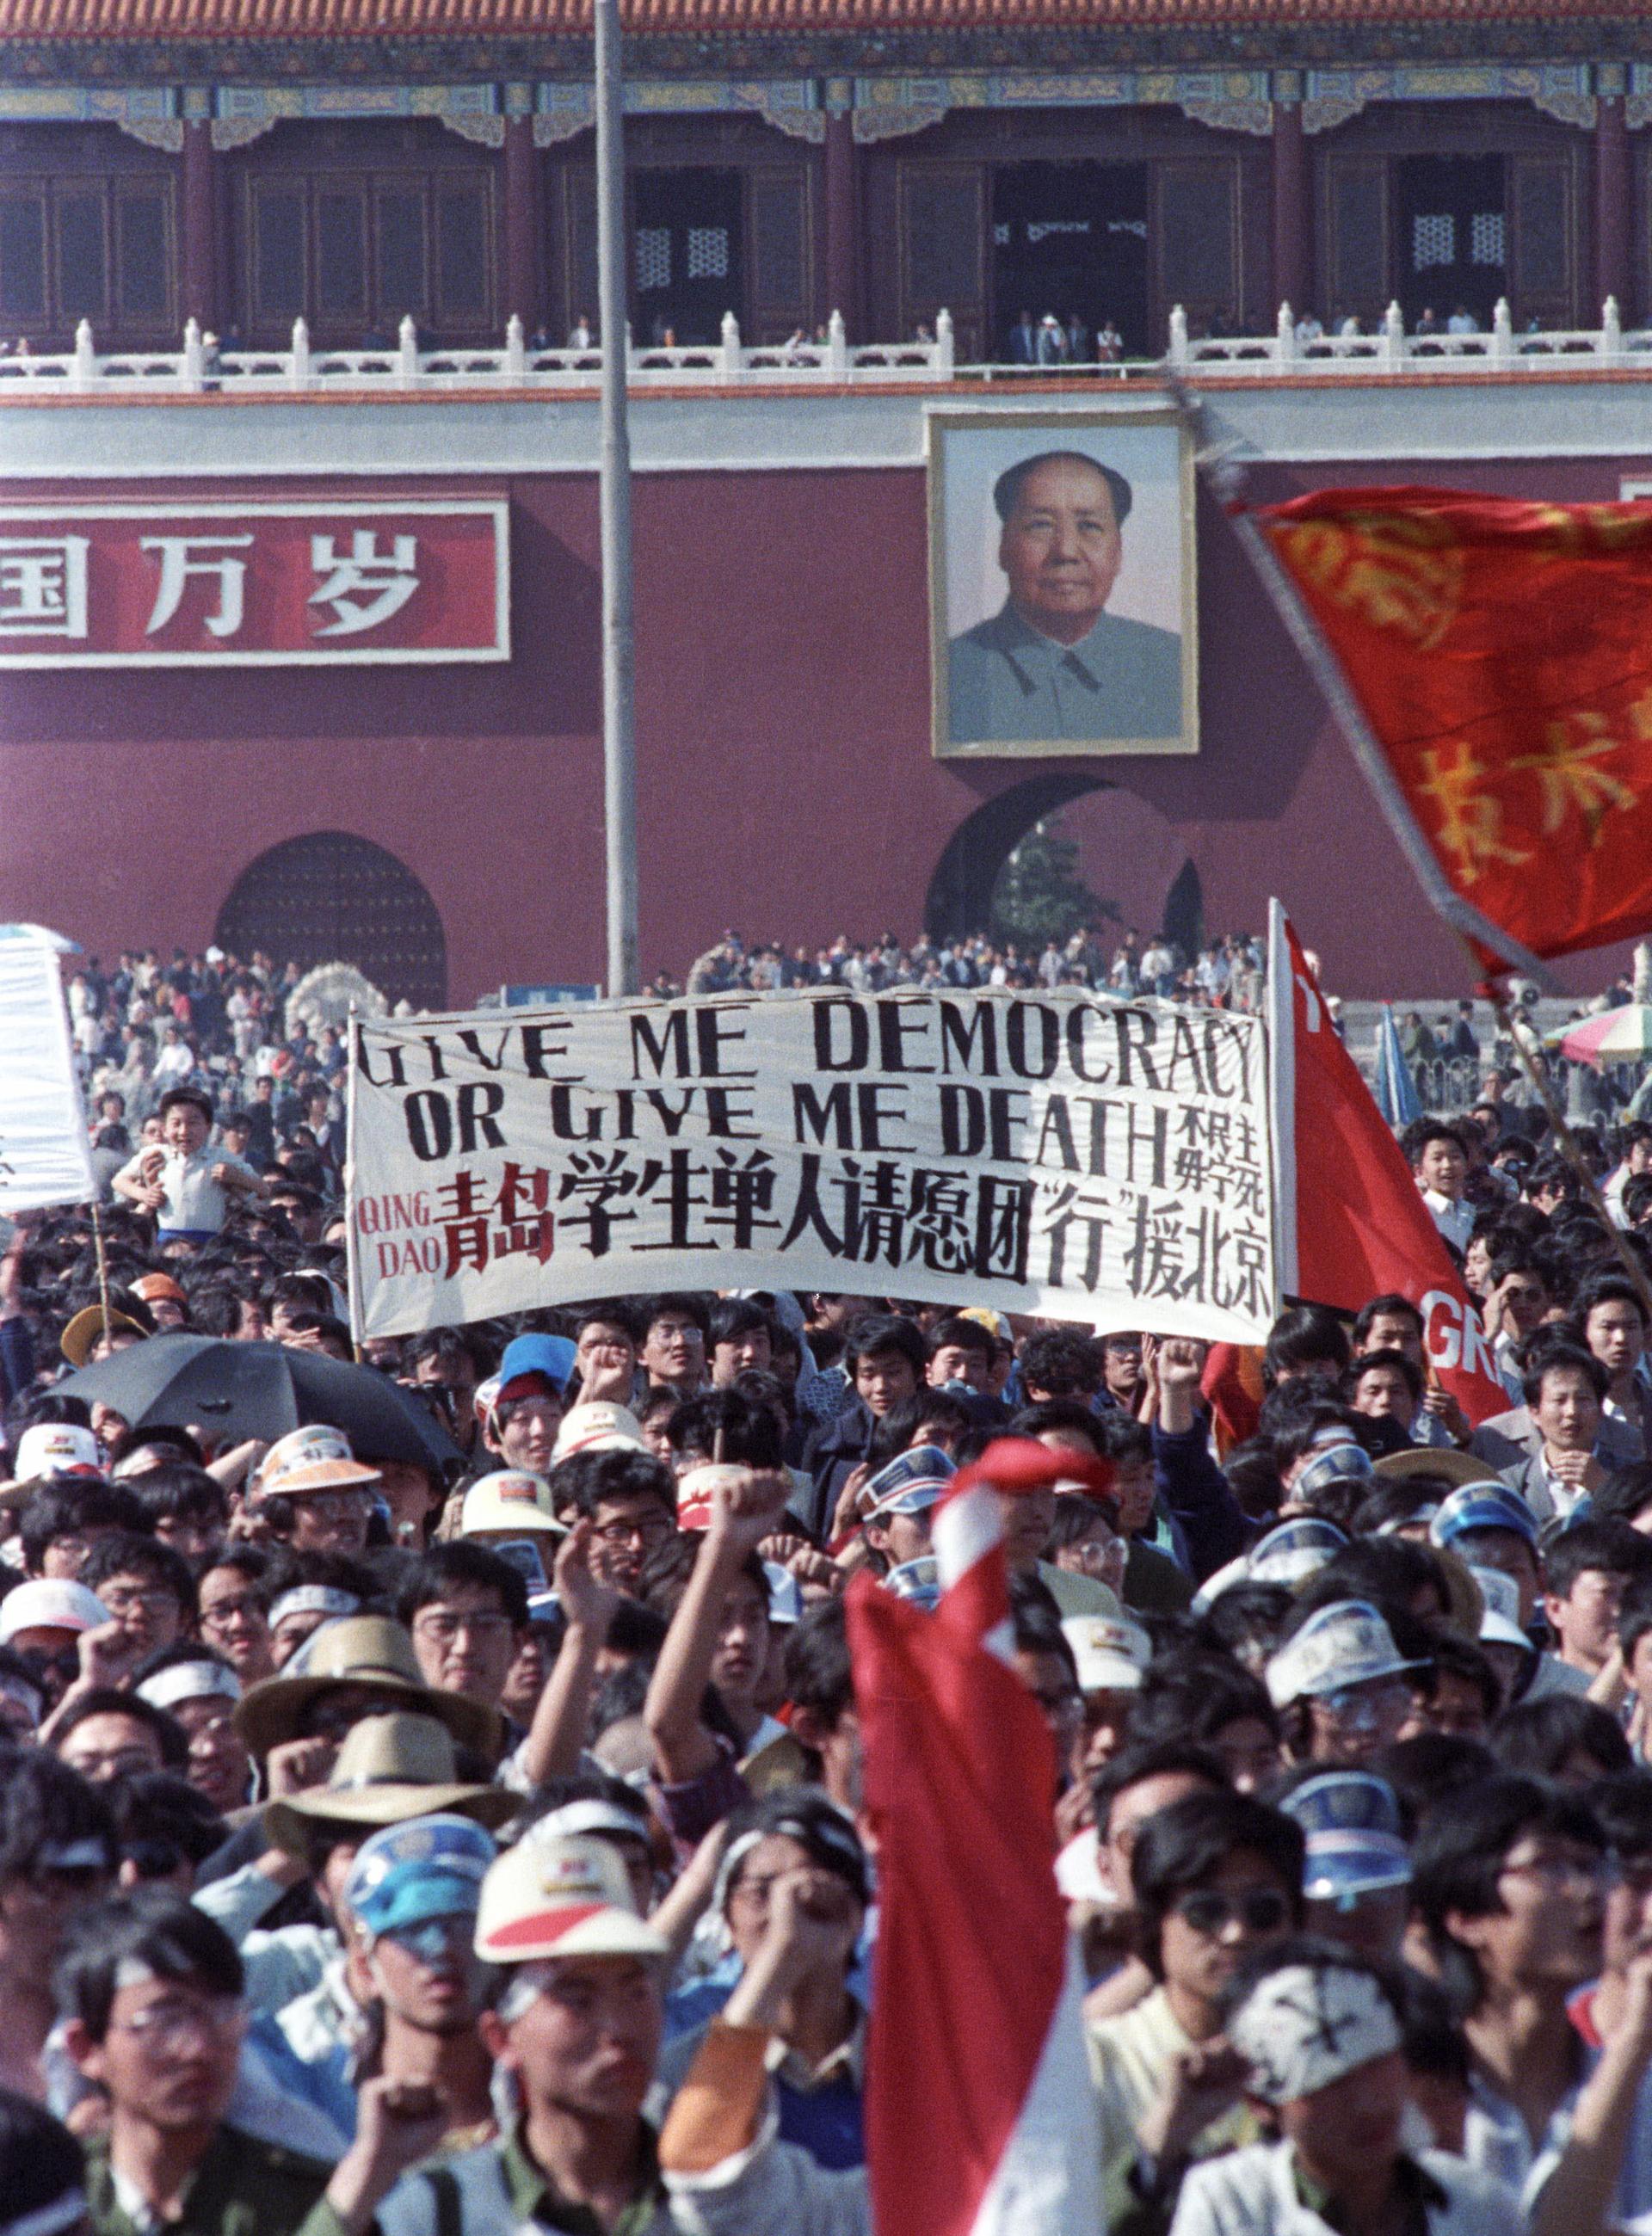 Protesters crowd Tiananmen Square and carry a banner that says 